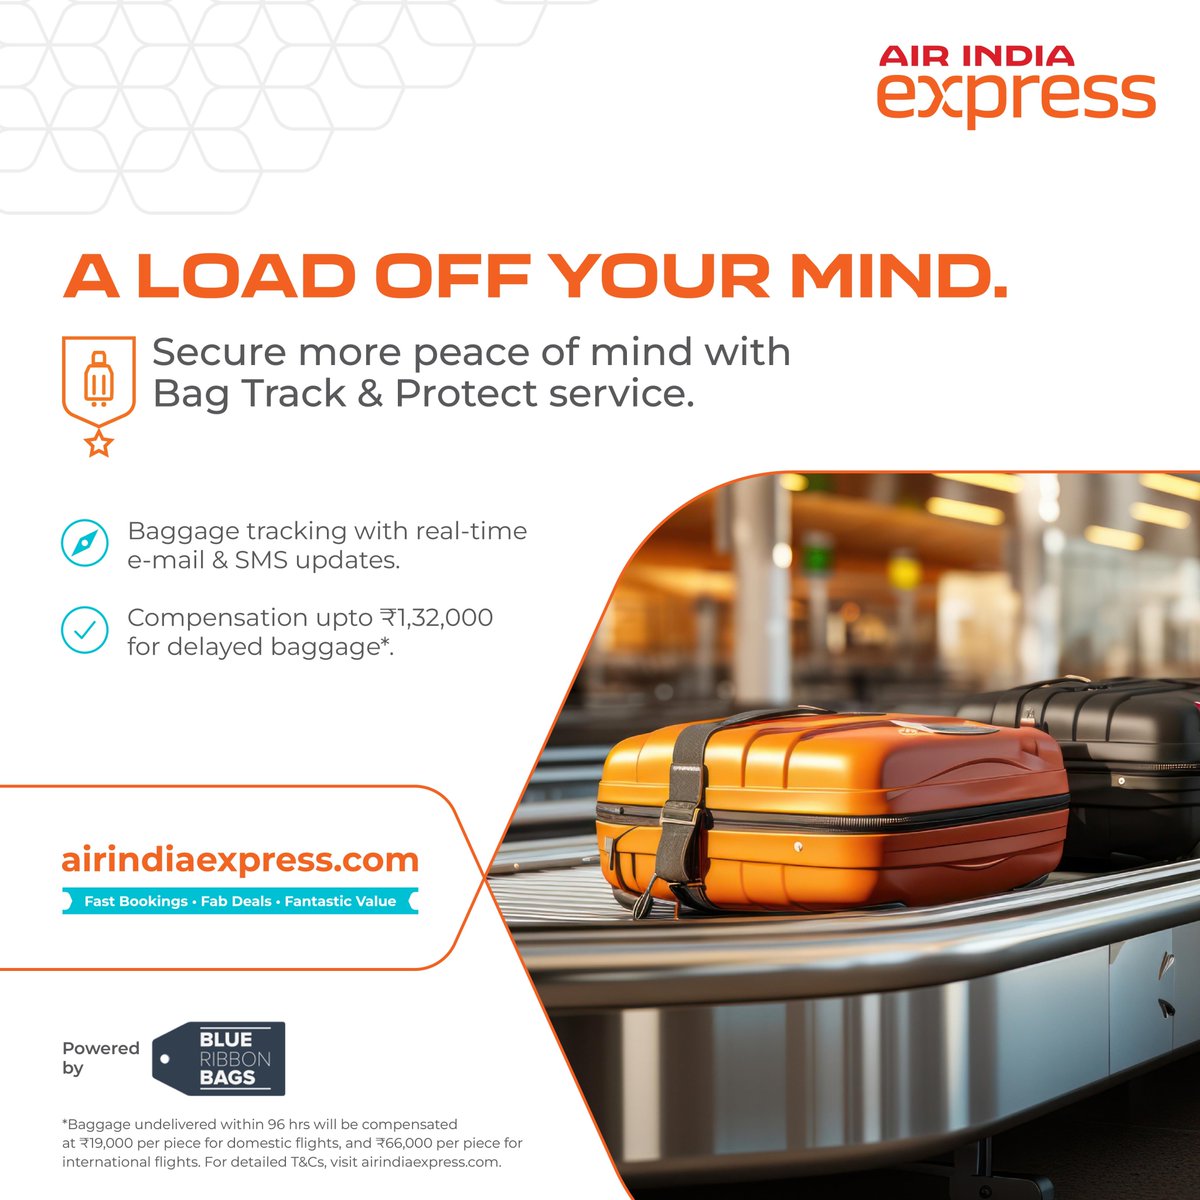 Push back and relax with our Bag Track and Protect services powered by @BlueRibbon_Bags Enjoy a peaceful flight knowing that your belongings are in safe hands. 📩Live updates on e-mail and SMS. 💰Compensation up to ₹1,32,000 for lost/delayed baggage. #FlyAsYouAre with